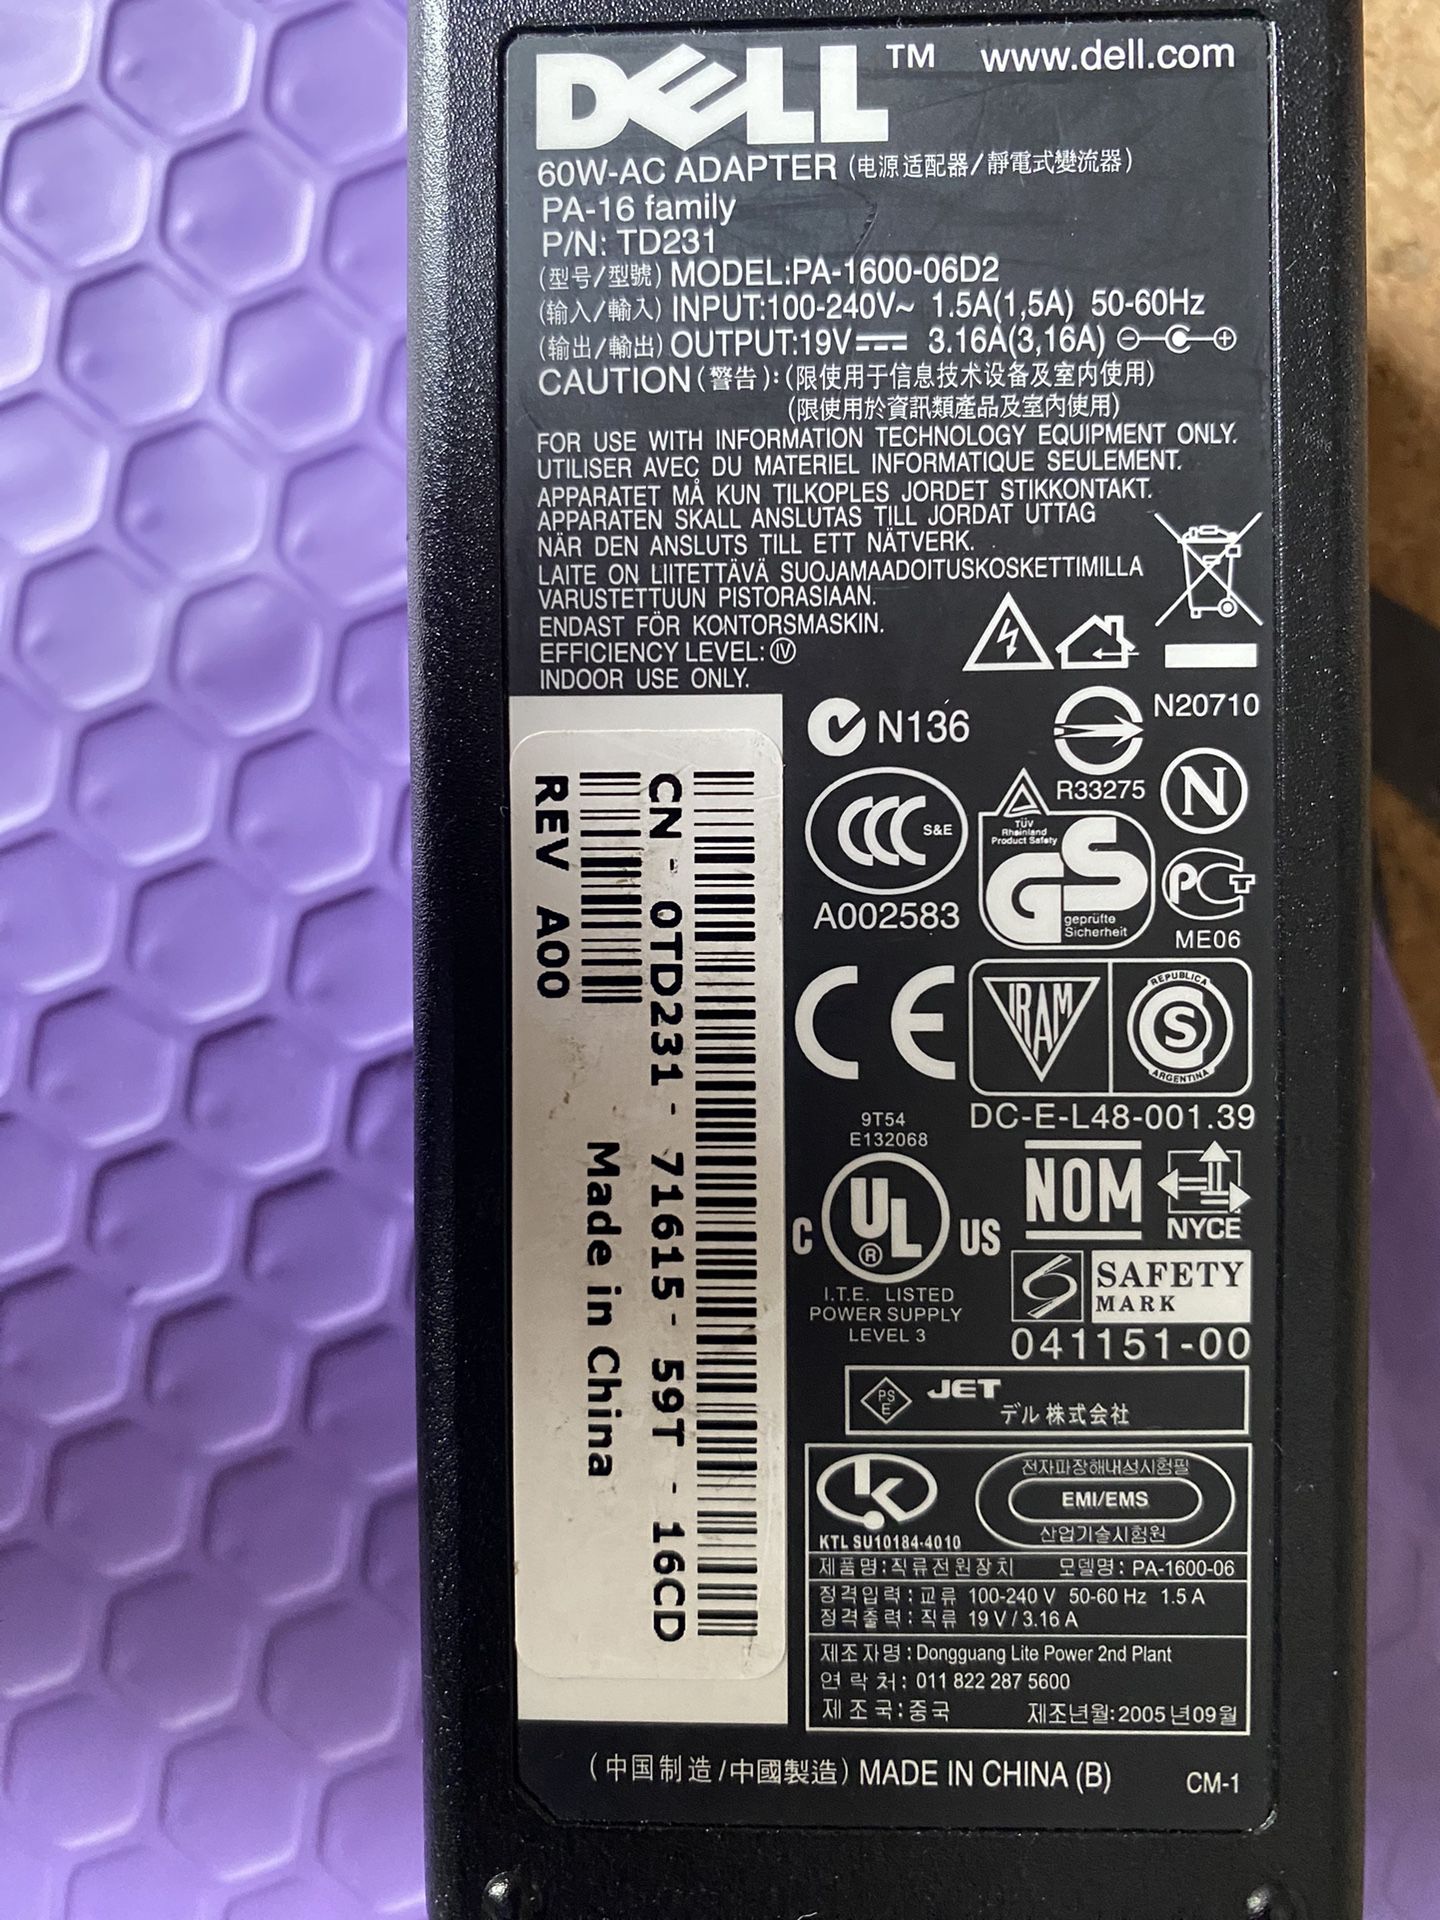 Dell Power Adapter pA-1(contact info removed)